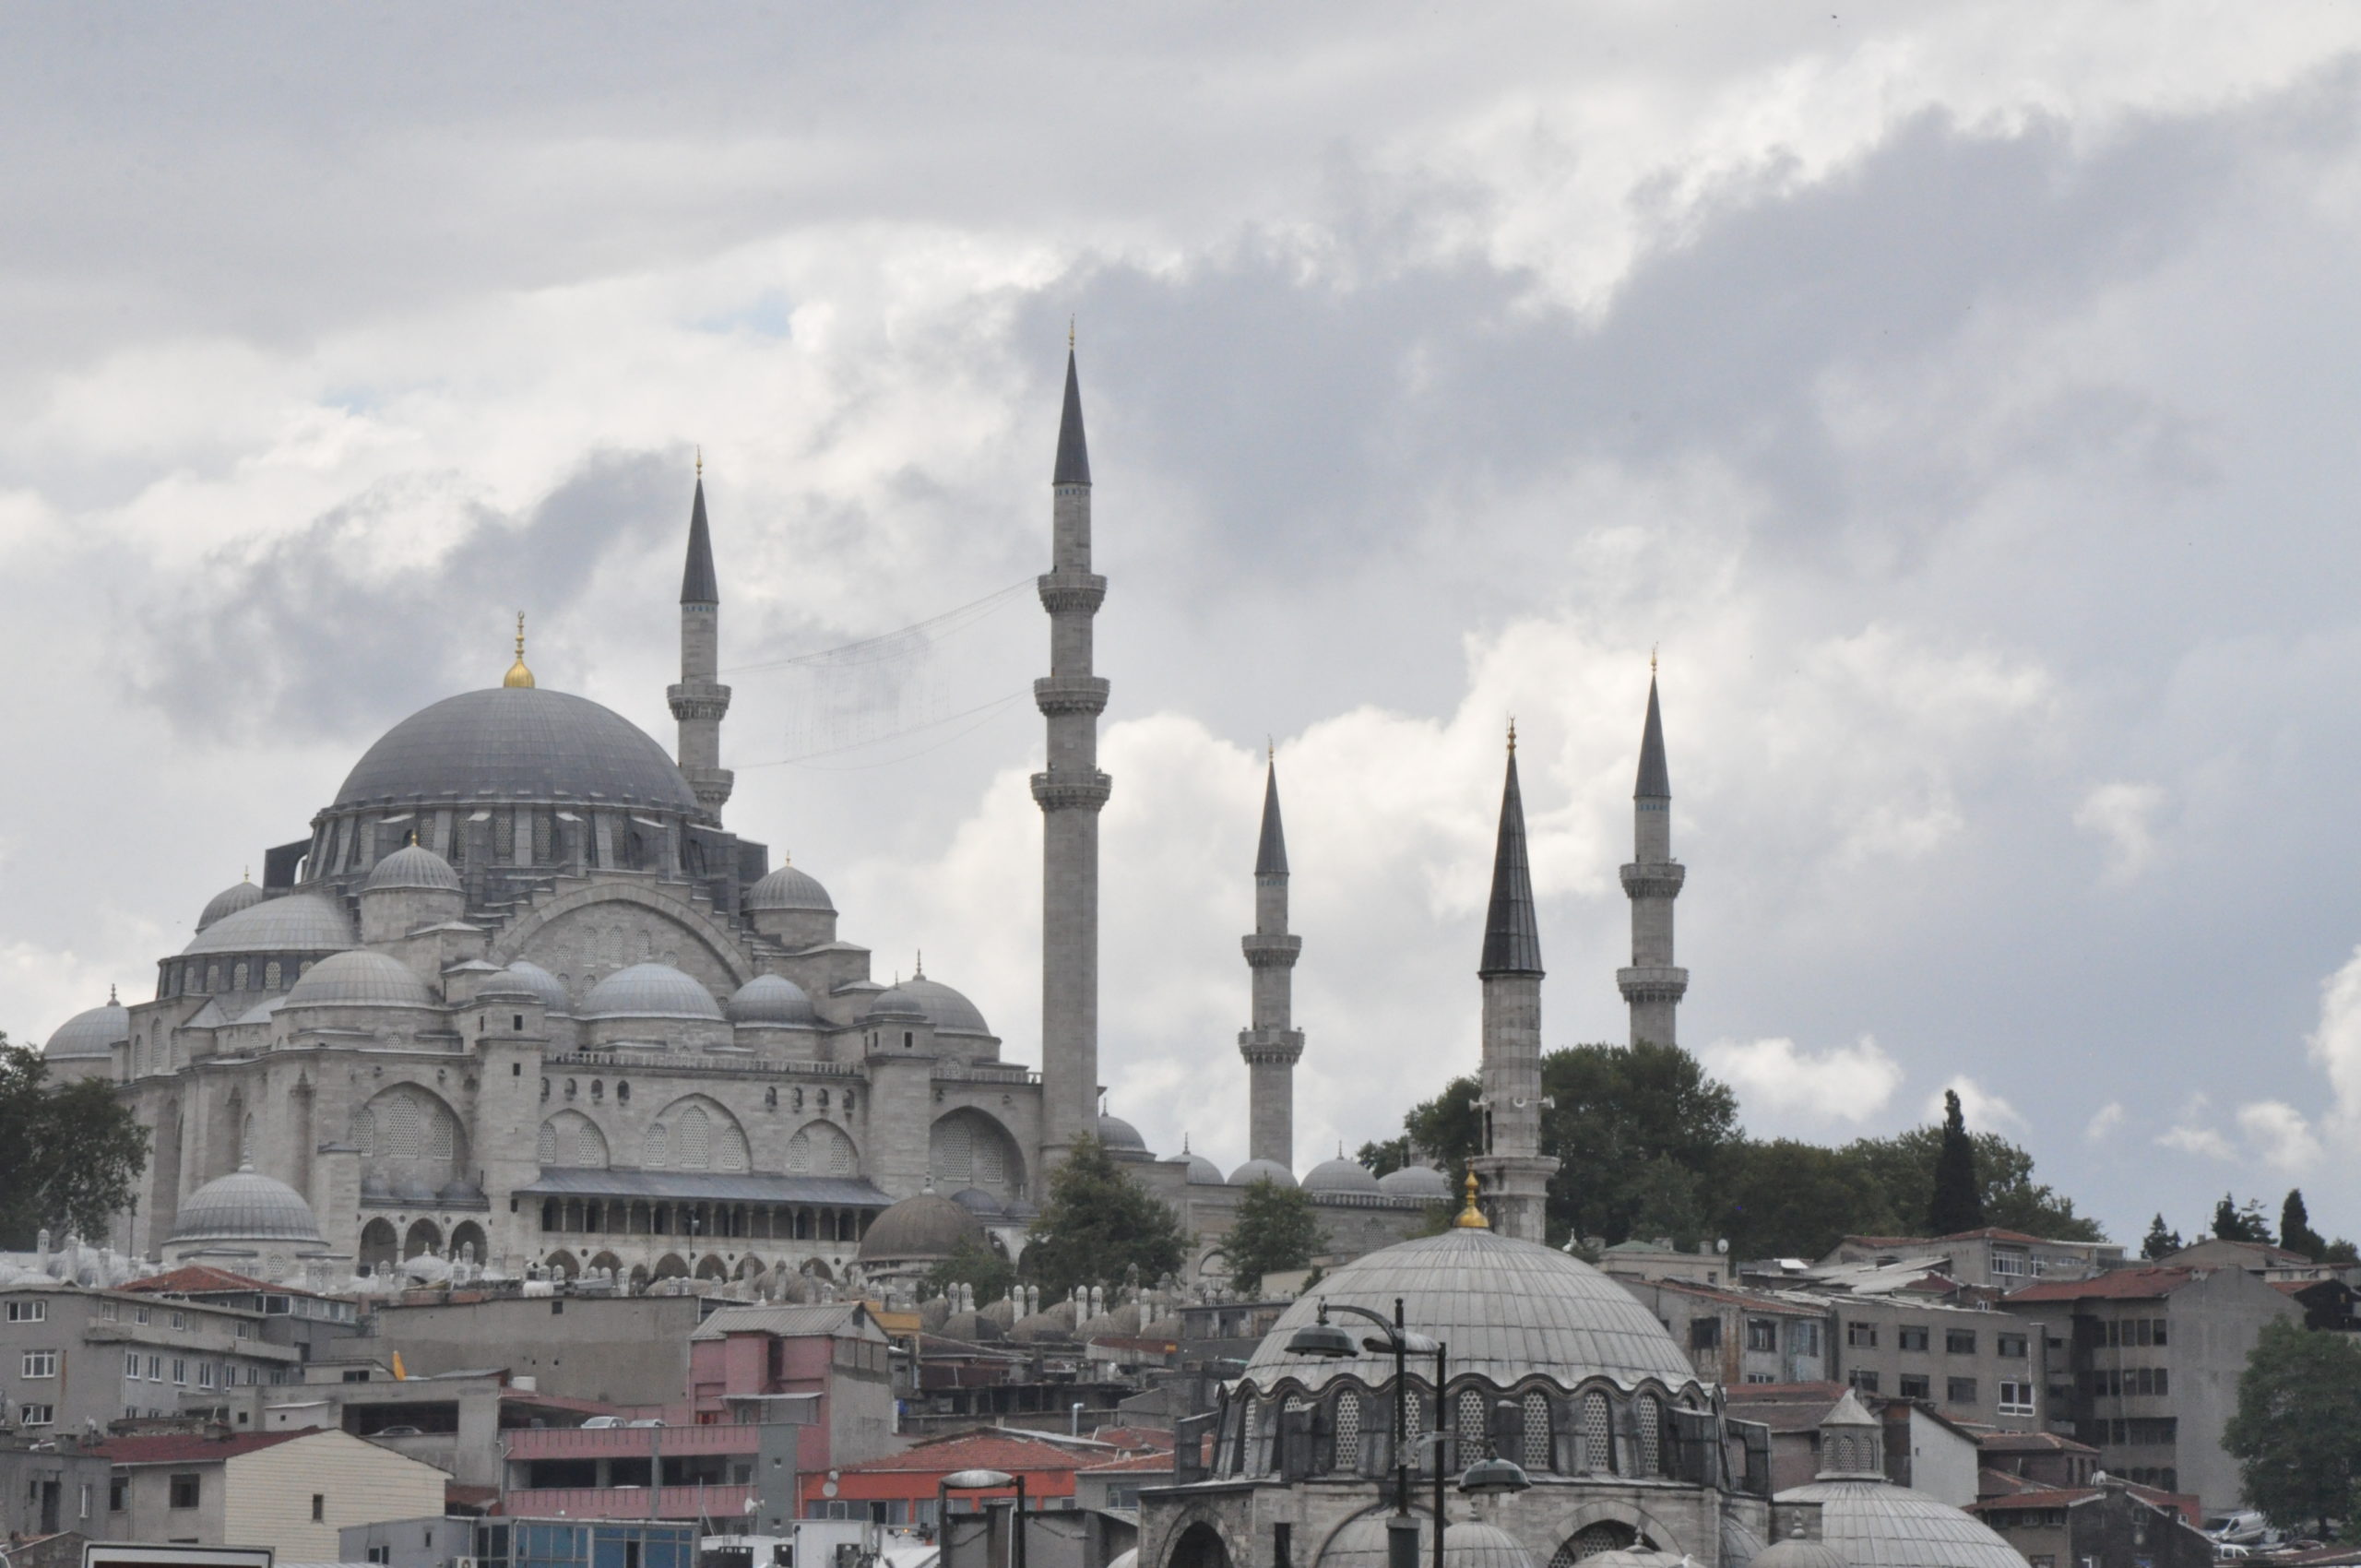 Admire the Architecture of the Süleymaniye Mosque